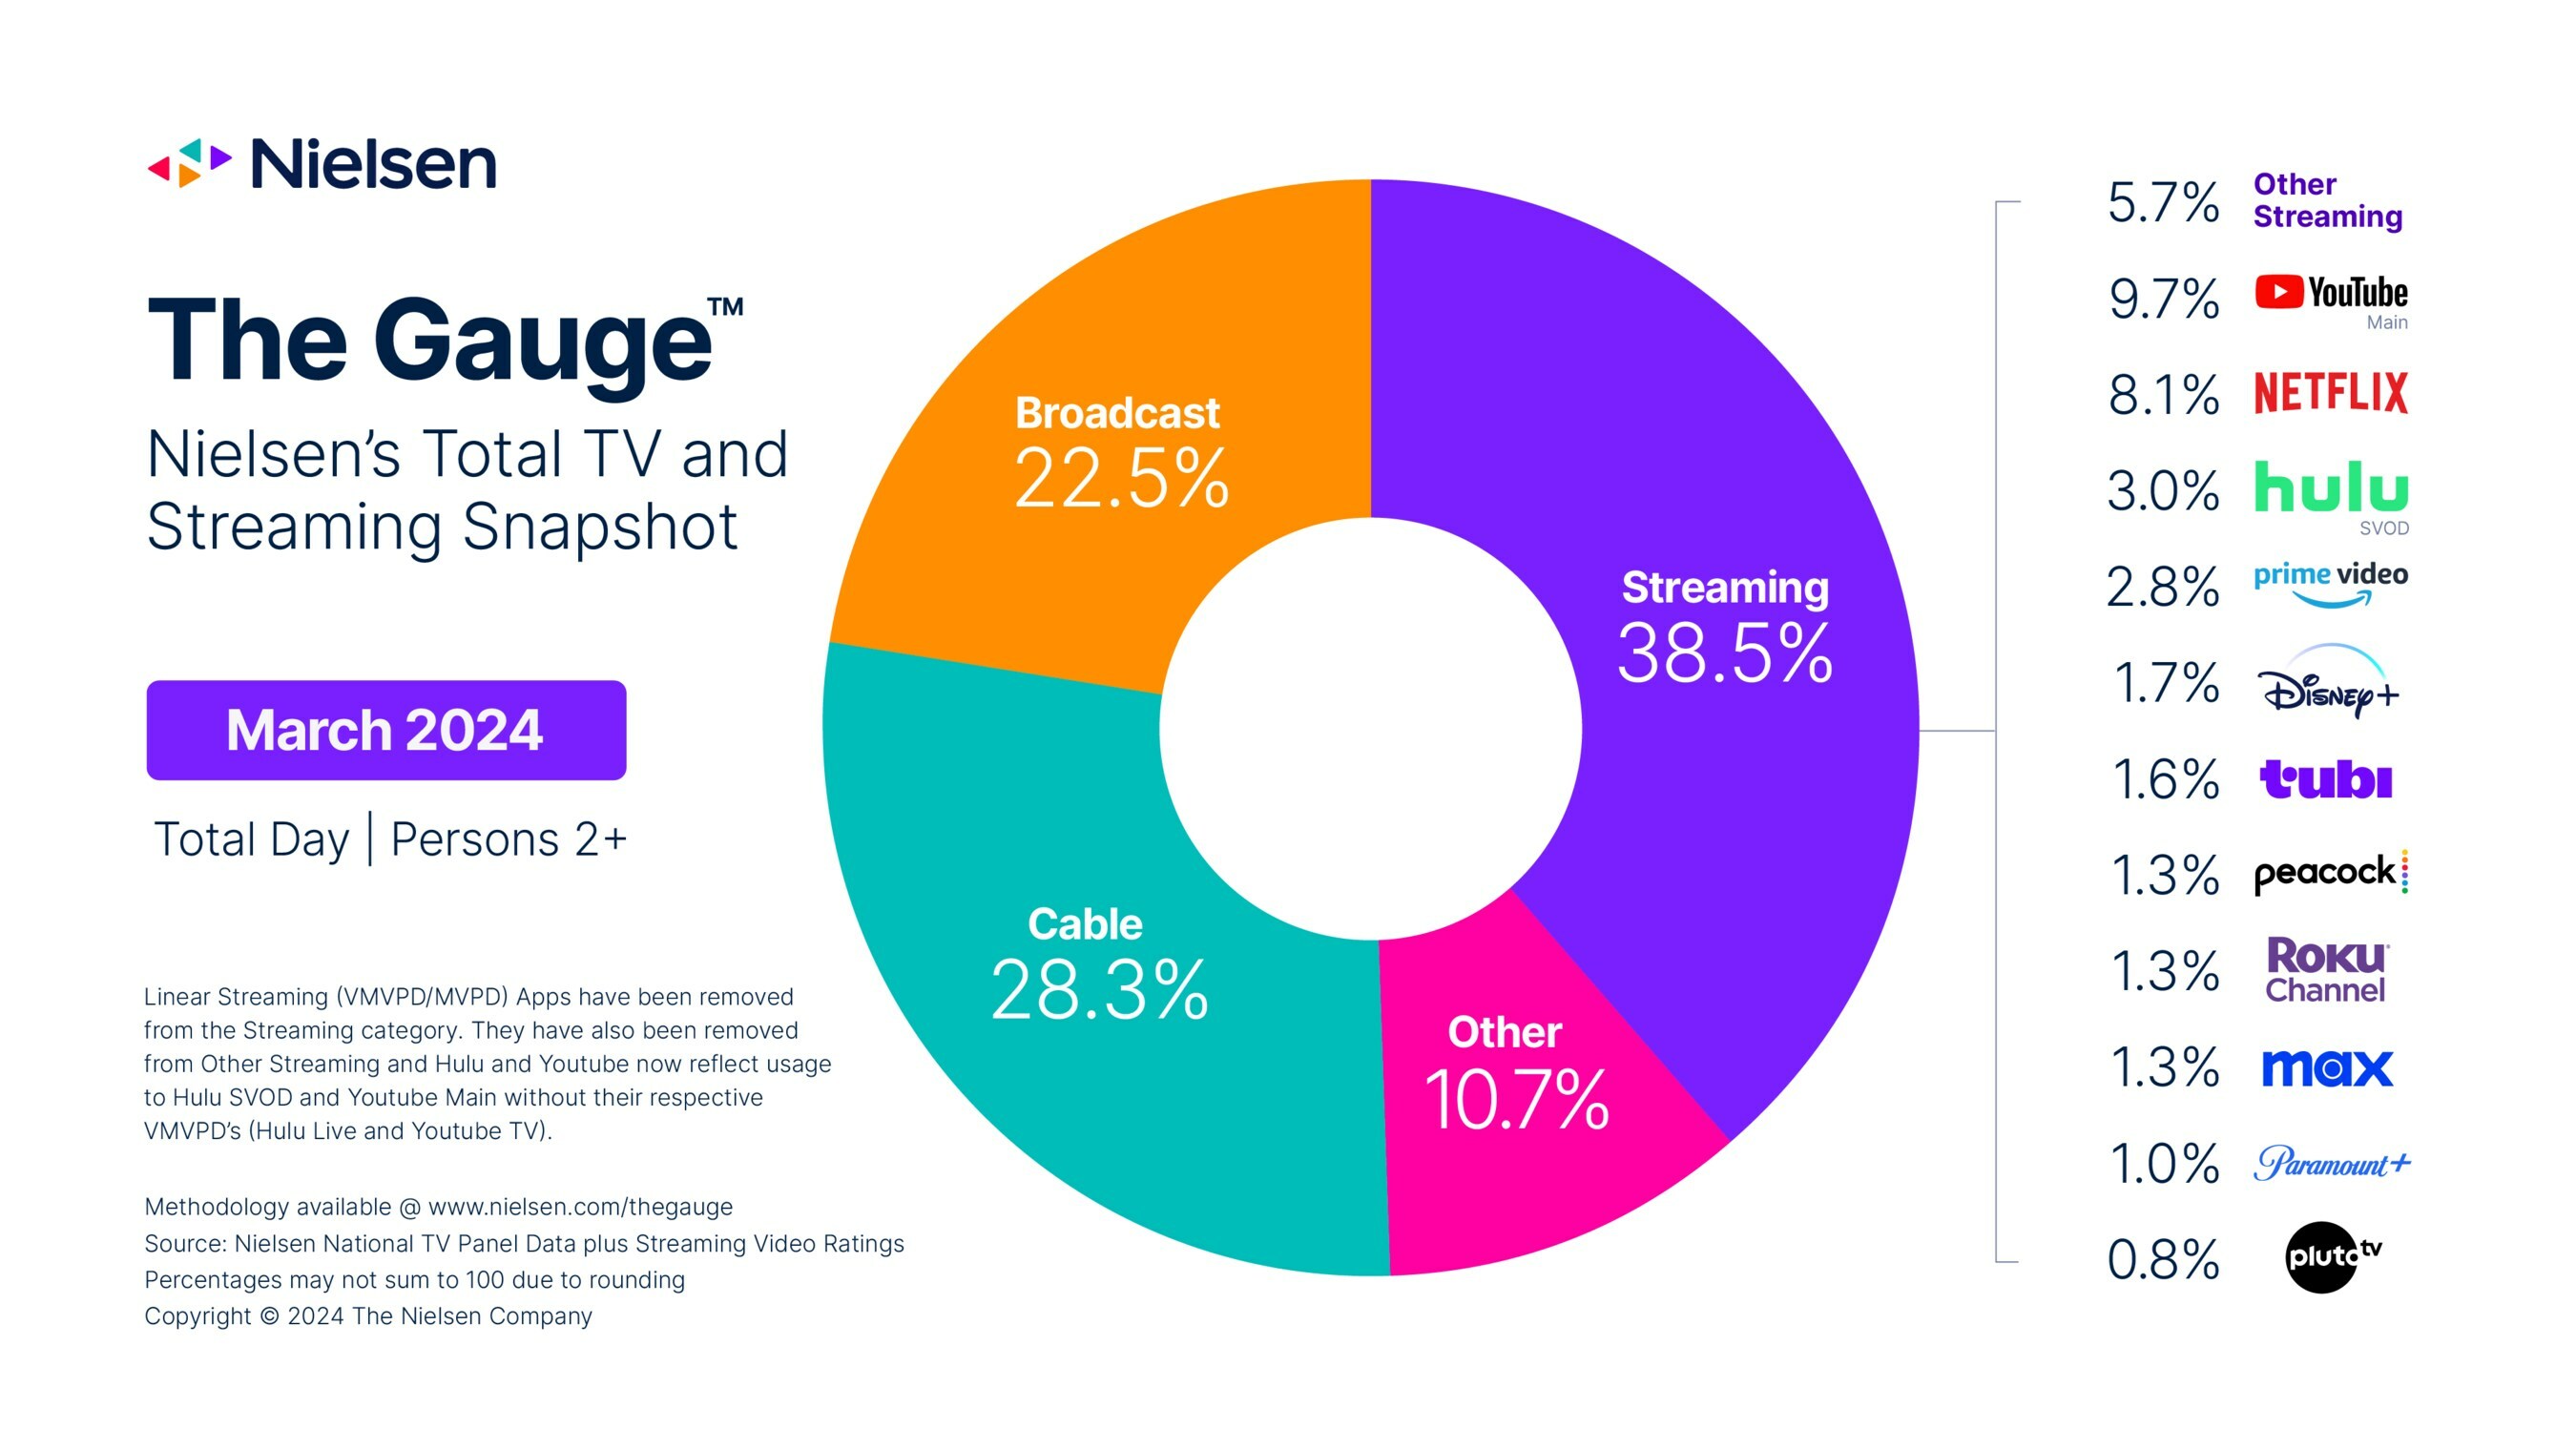 Nielsen: The Gauge, March 2024 - Streaming (YouTube, Netflix, Hulu, Prime Video, Disney+, tubi, Peacock, Roku Channel, MAX, Paramount+, Pluto TV, Other streaming), Cable TV, Broadcast, Other